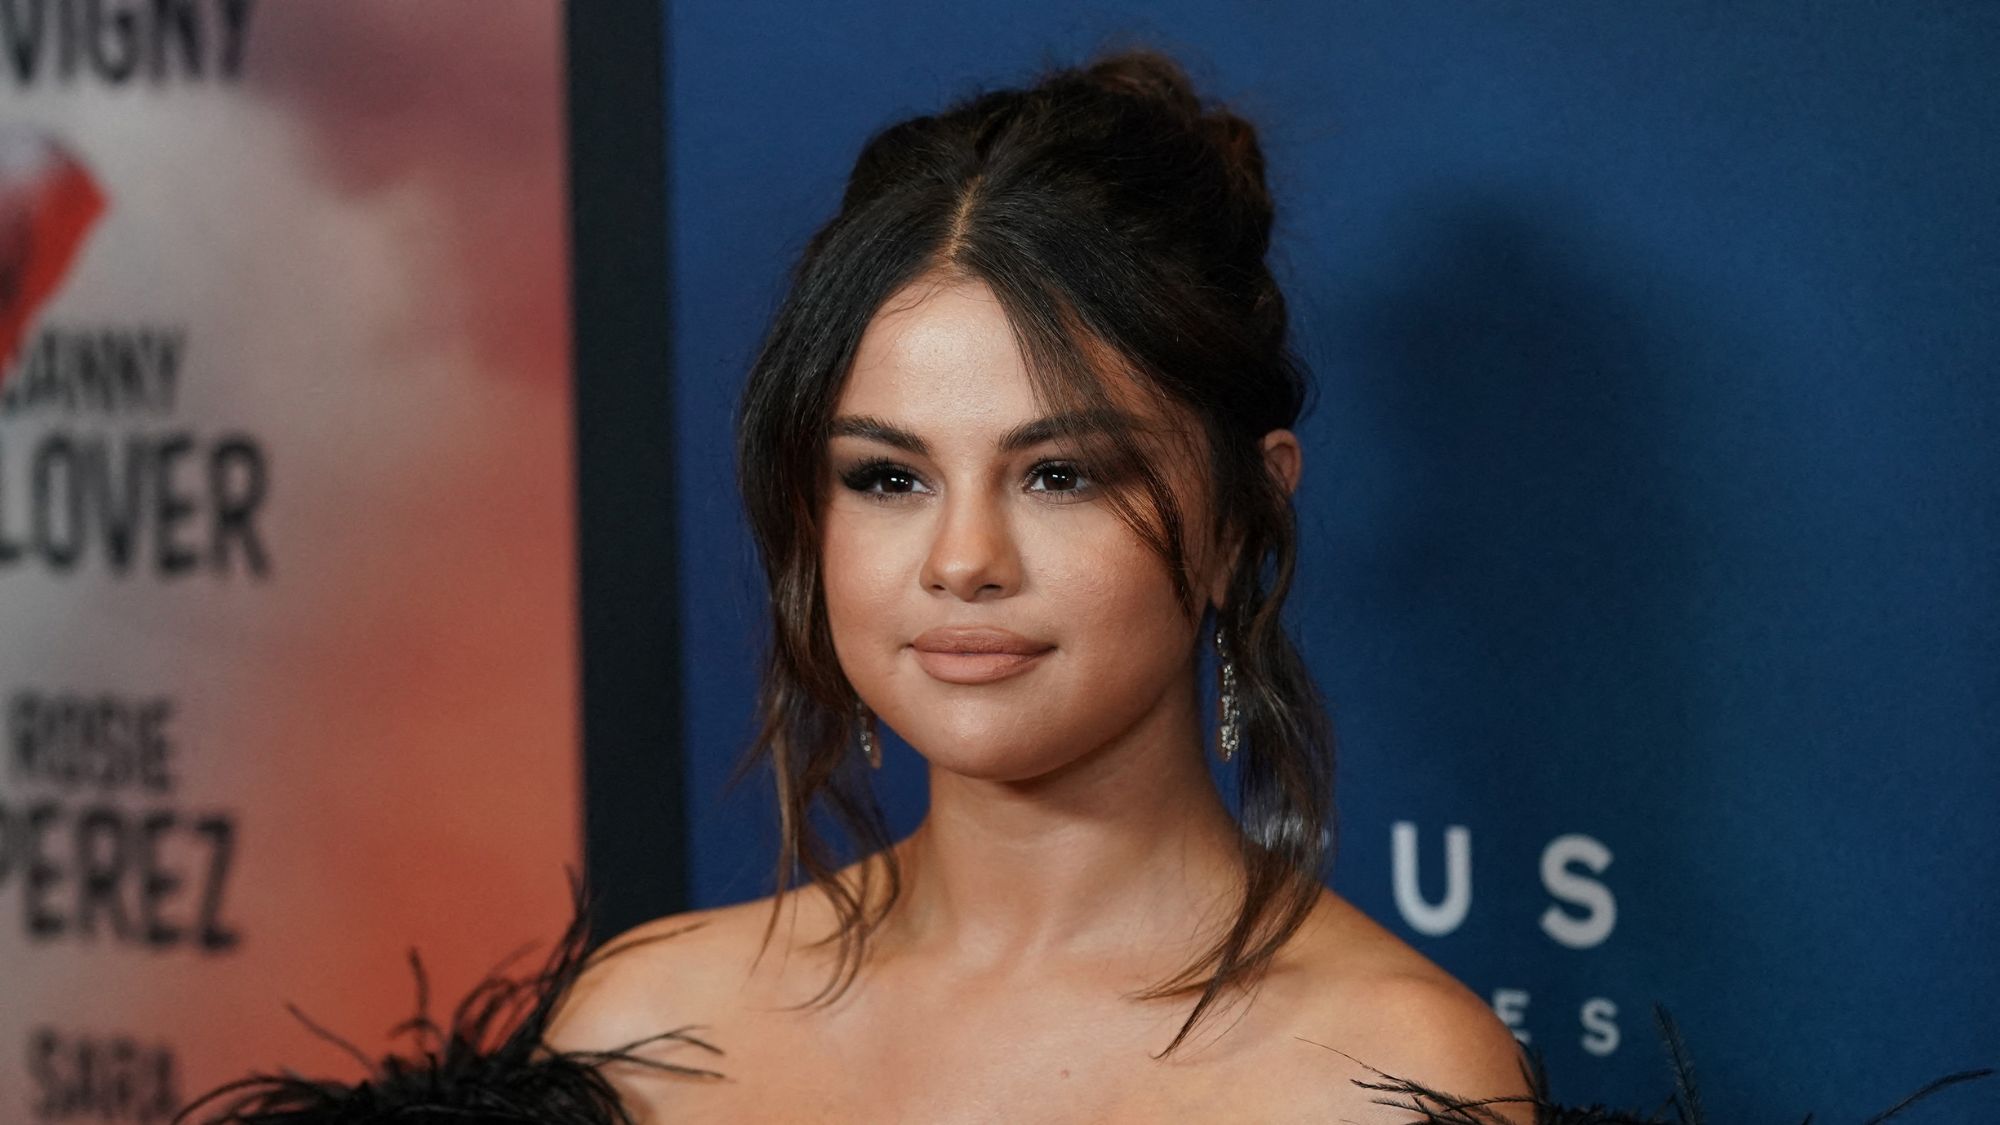 Selena Gomez reveals her lioness mane in a new photo.